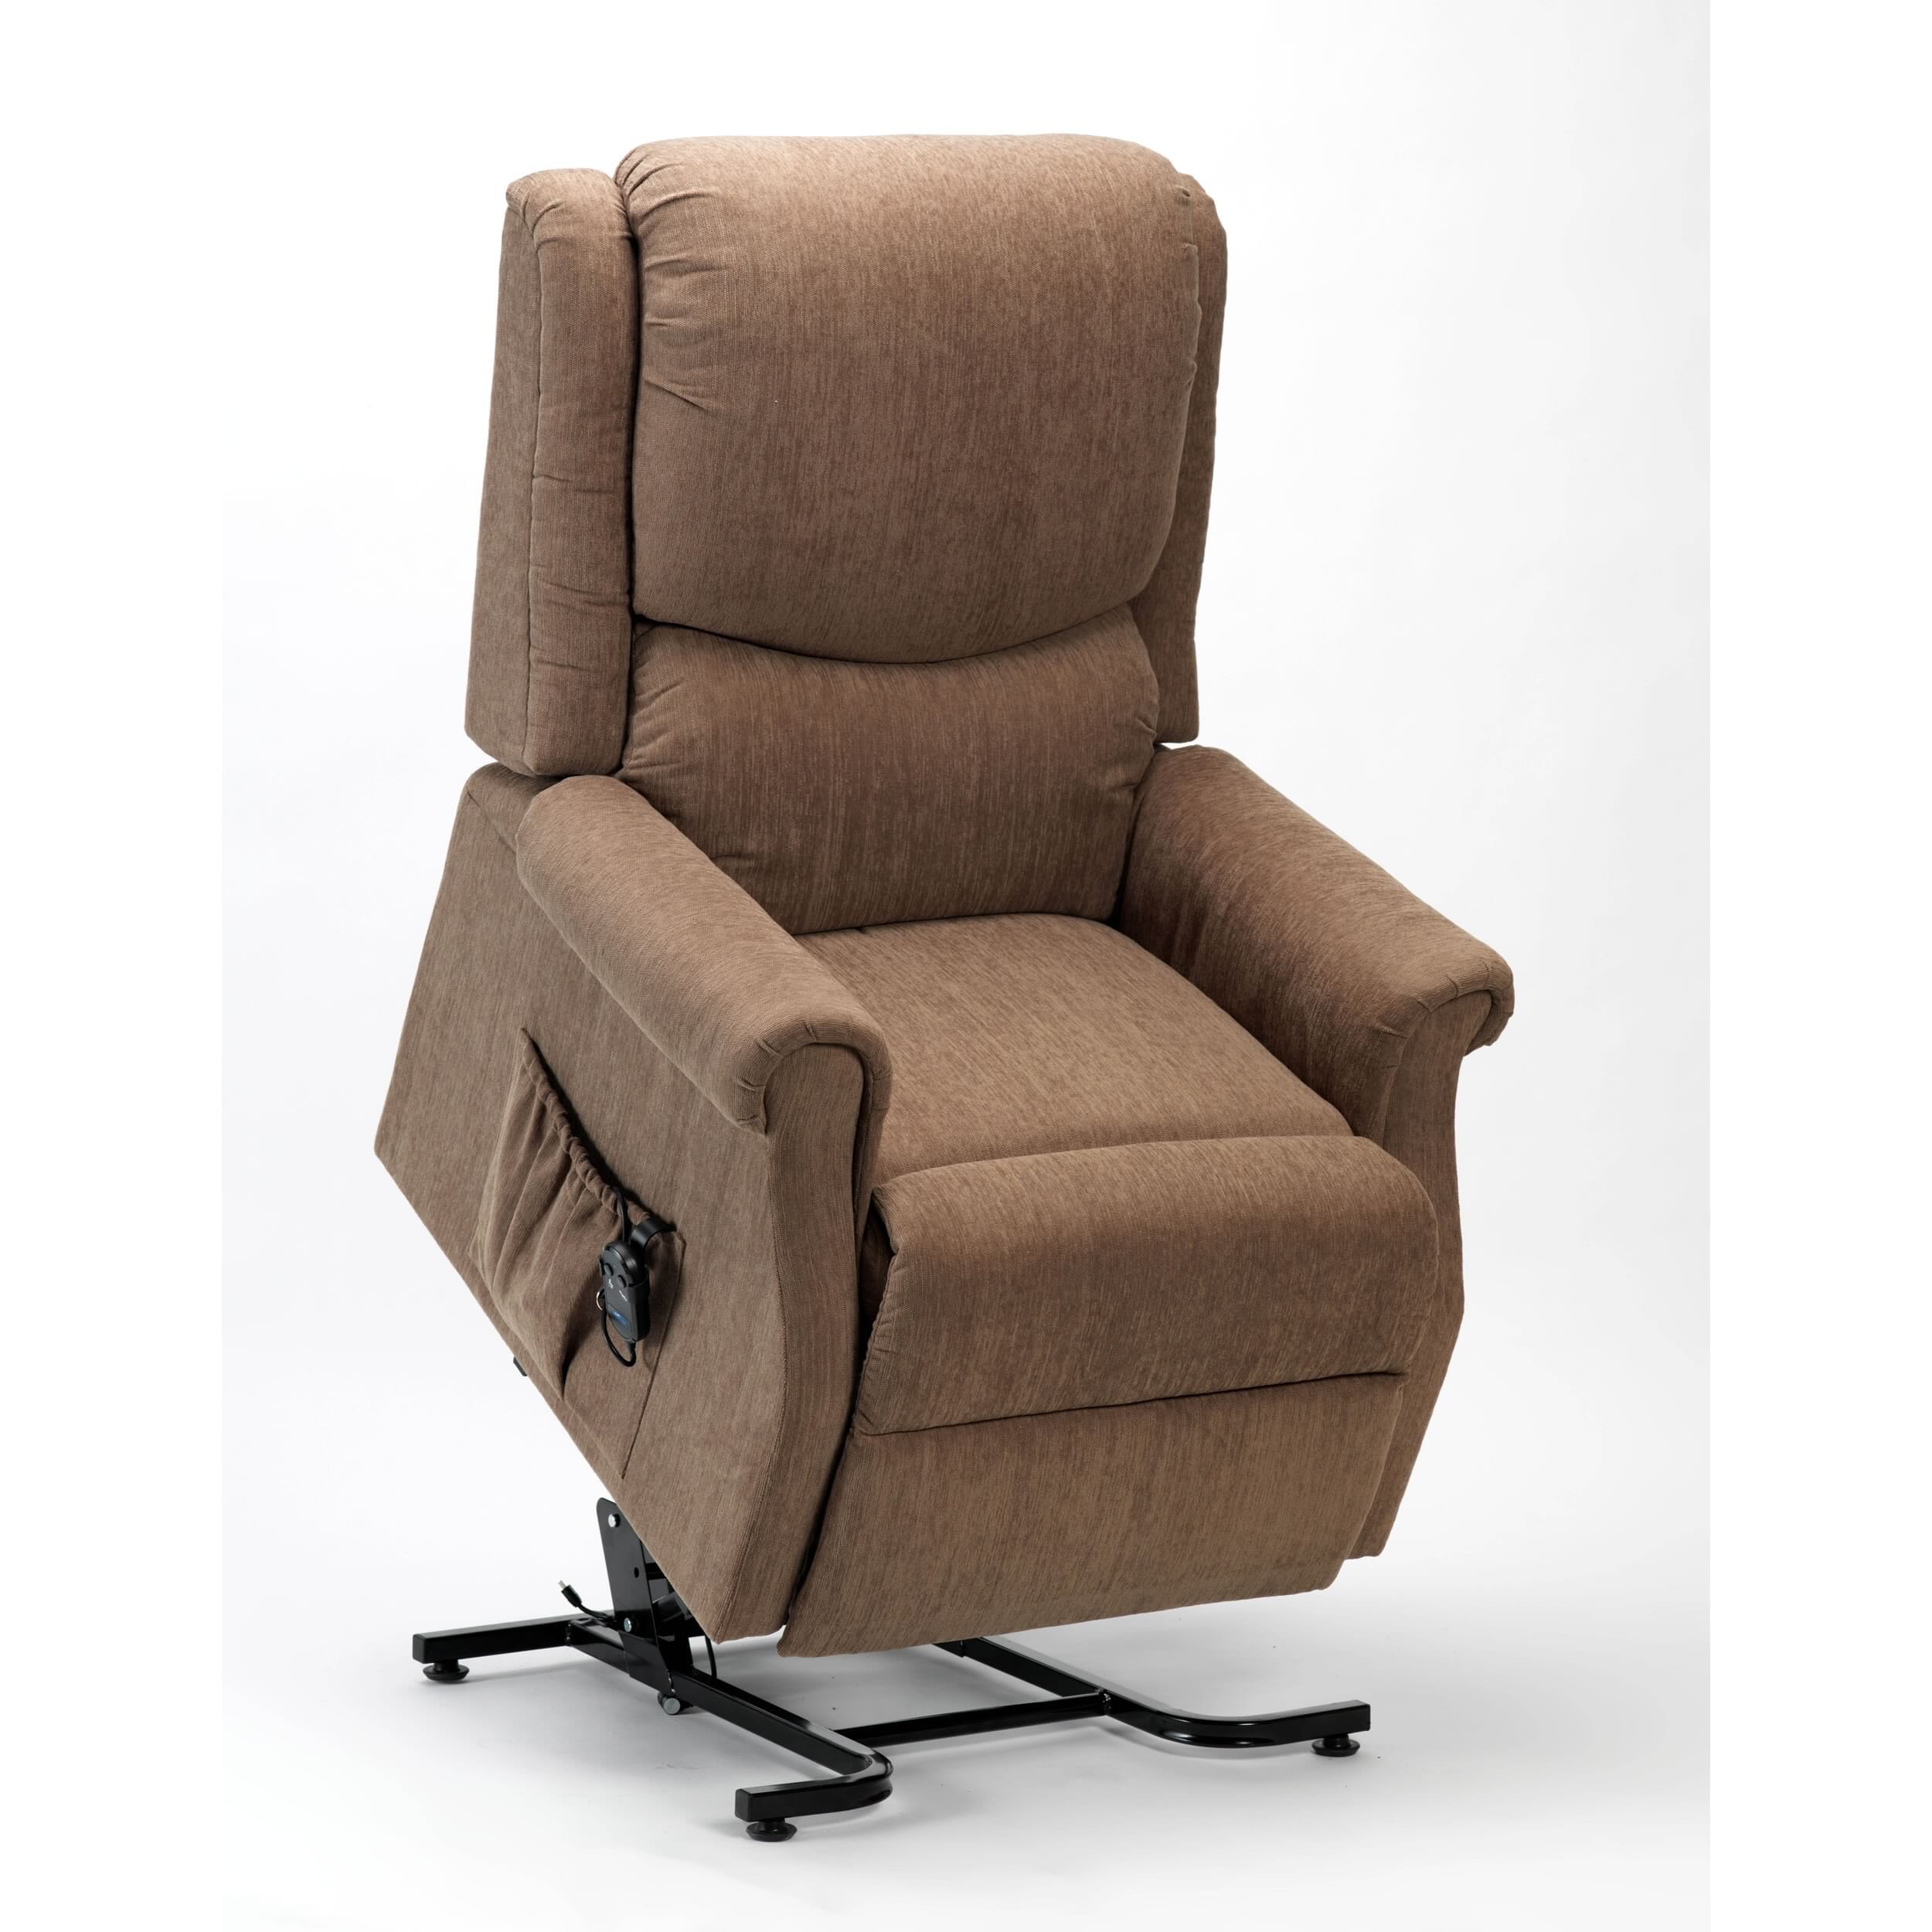 View Indiana Rise and Recline Chair Petite Mushroom information